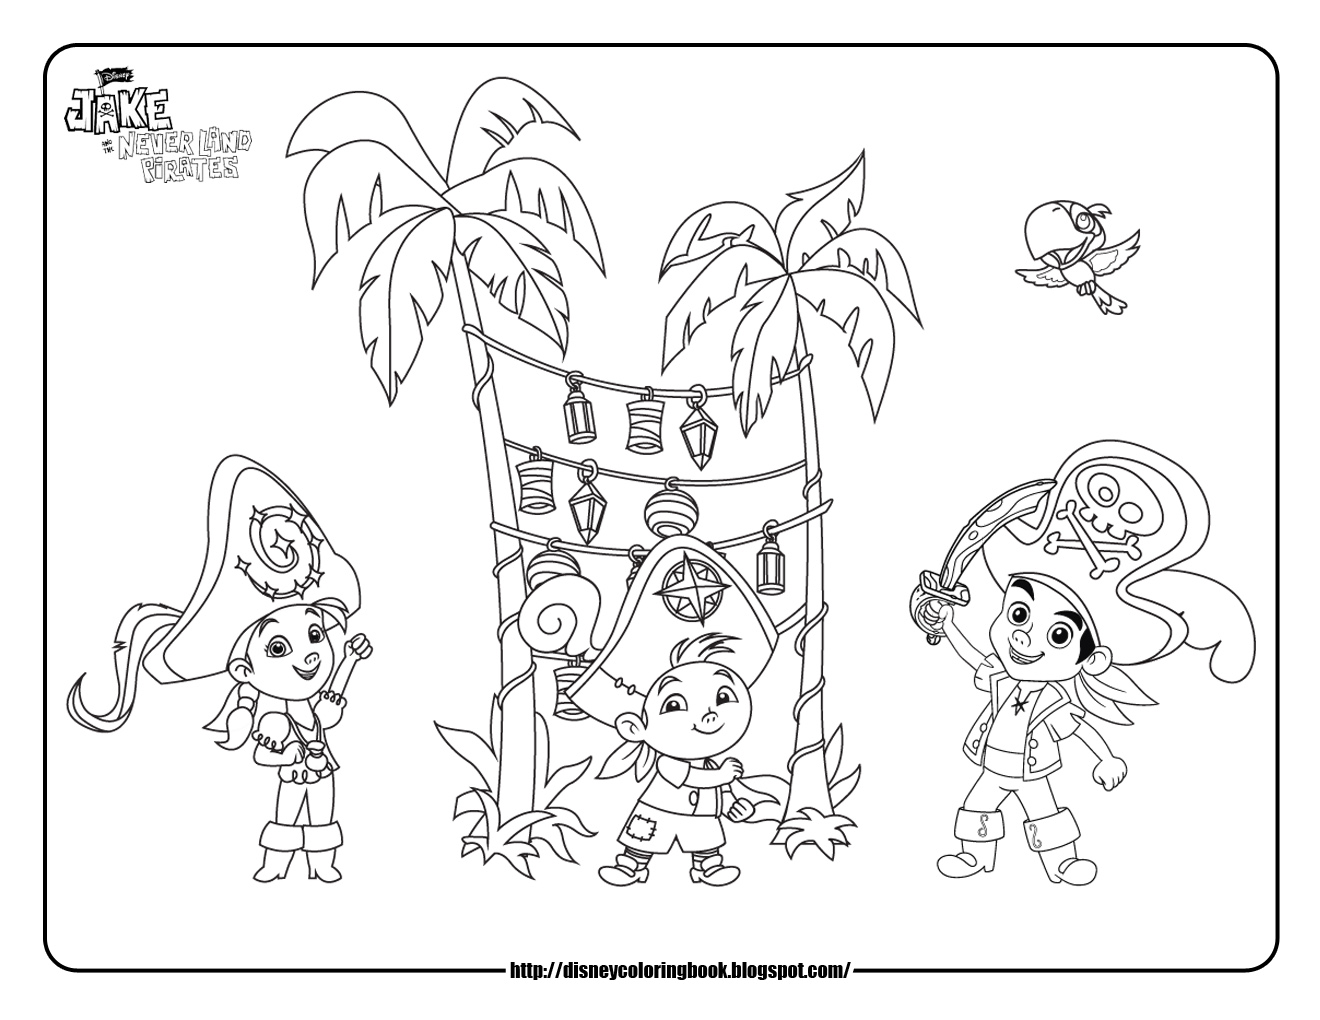 jake-and-the-neverland-pirates-3-free-disney-coloring-sheets-learn-to-coloring